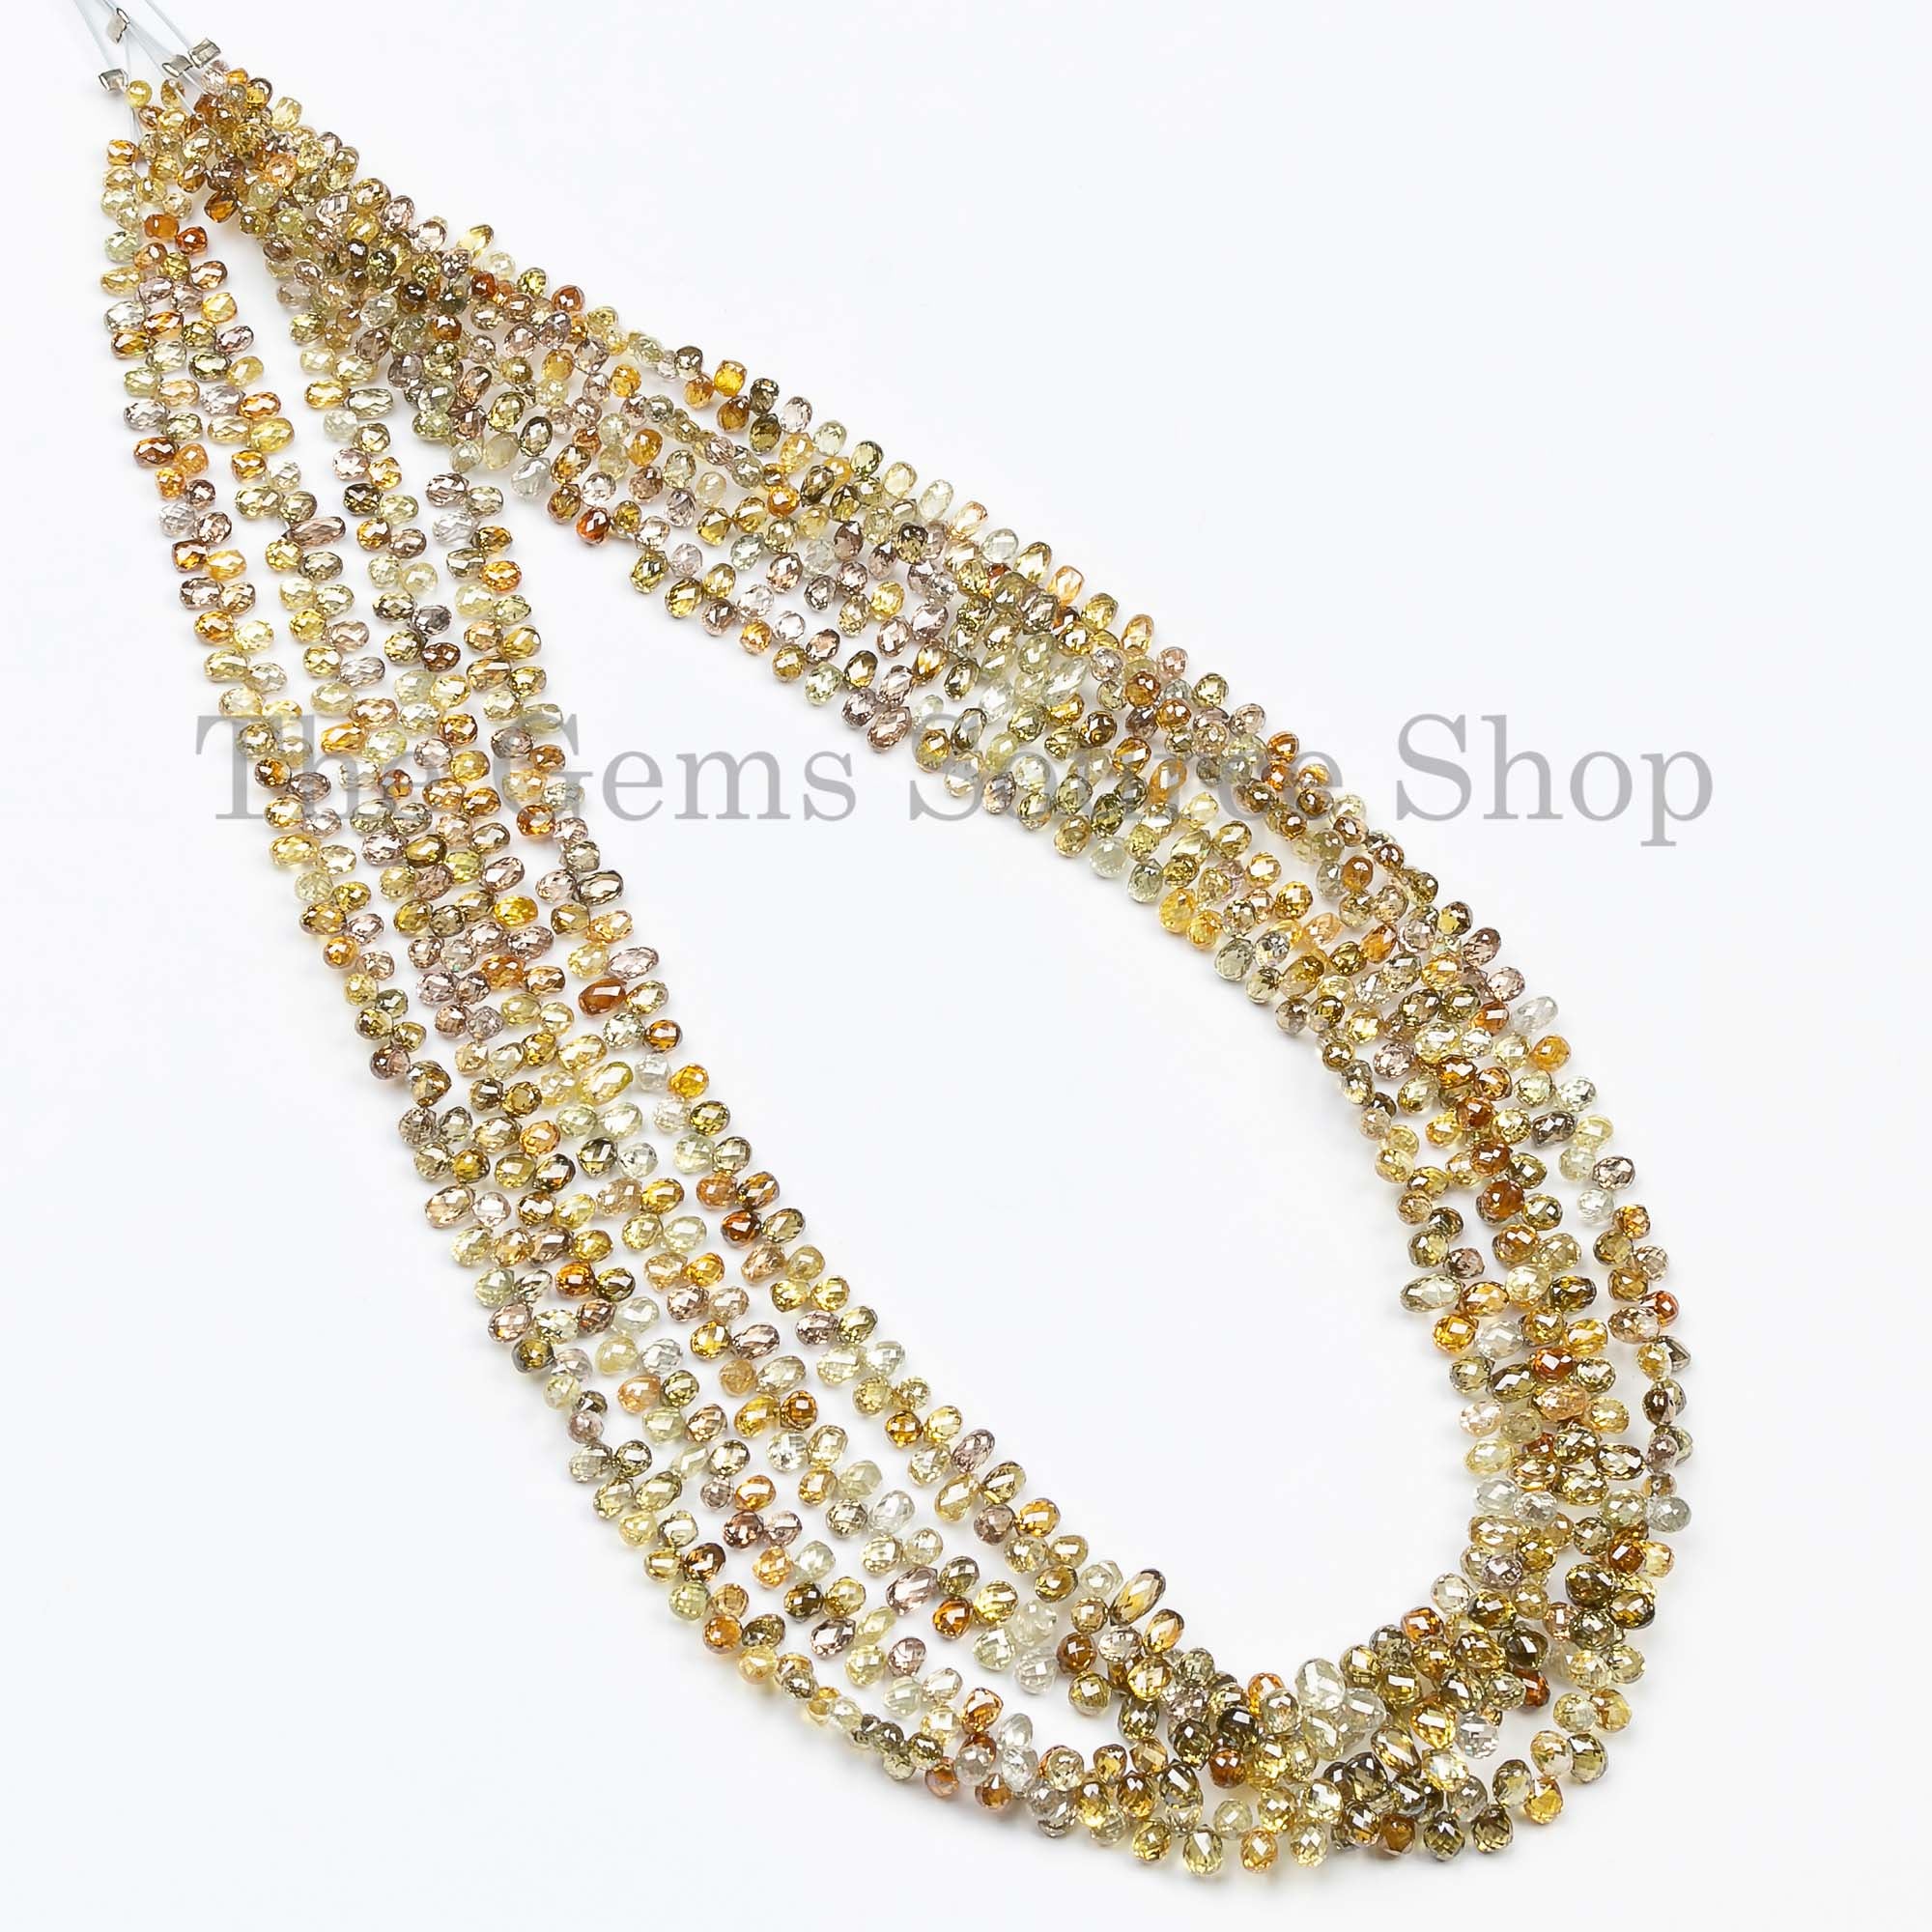 Exclusive High Quality Multi Color Sparkling Diamond Drop Beads, Diamond Faceted Beads